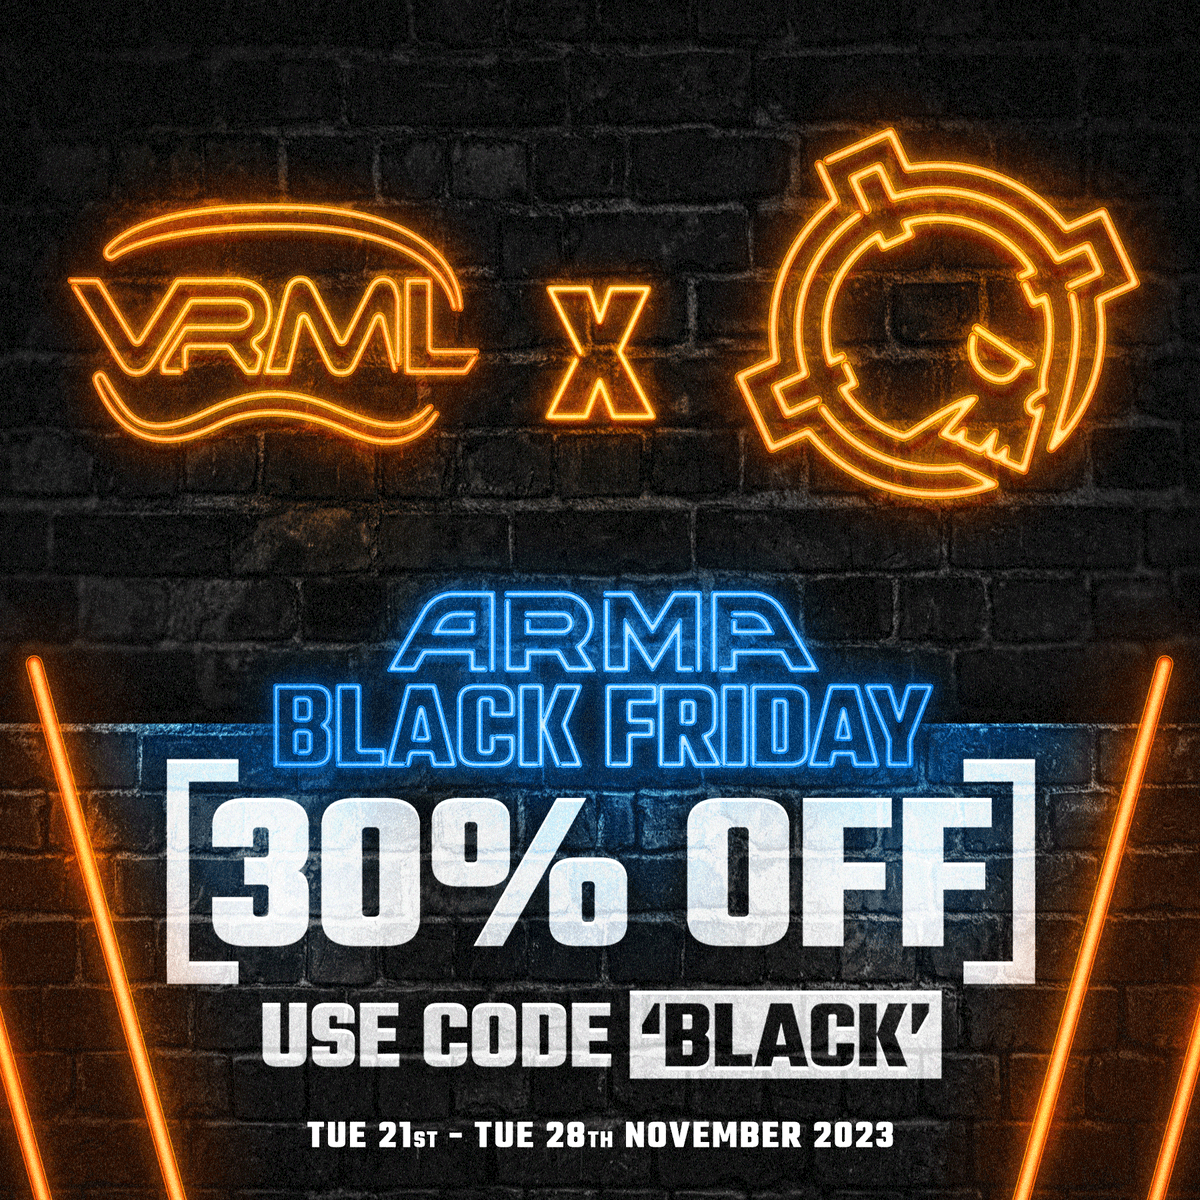 🚨 ARMA BLACK FRIDAY SALE NOW LIVE🚨 • 30% OFF All Products Sitewide • 50% OFF Team Store Packages Use code BLACK through 21-28th November arma.gg/collections/vr… #vrml #armaGG #vresports #suitup